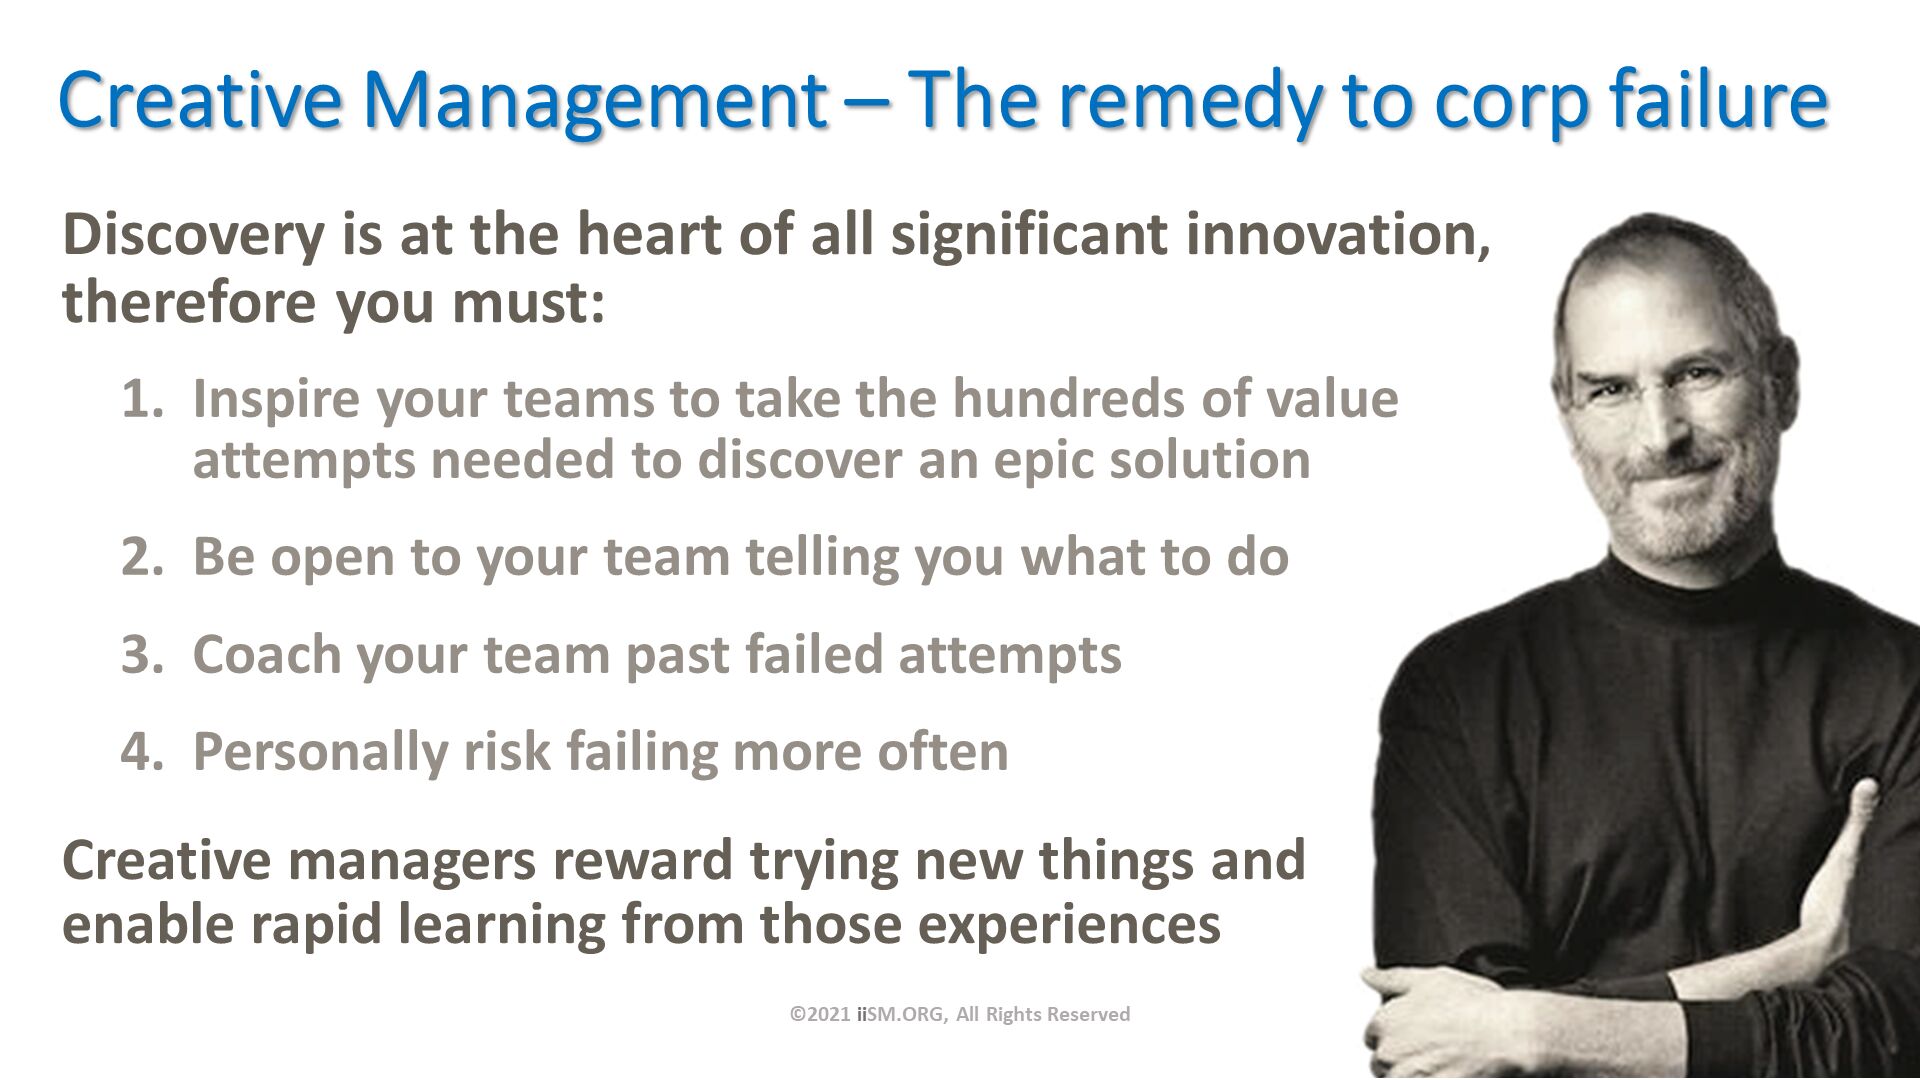 Discovery is at the heart of all significant innovation, therefore you must:. Creative Management – The remedy to corp failure. ©2021 iiSM.ORG, All Rights Reserved. Inspire your teams to take the hundreds of value attempts needed to discover an epic solution
Be open to your team telling you what to do
Coach your team past failed attempts
Personally risk failing more often. Creative managers reward trying new things and enable rapid learning from those experiences. 